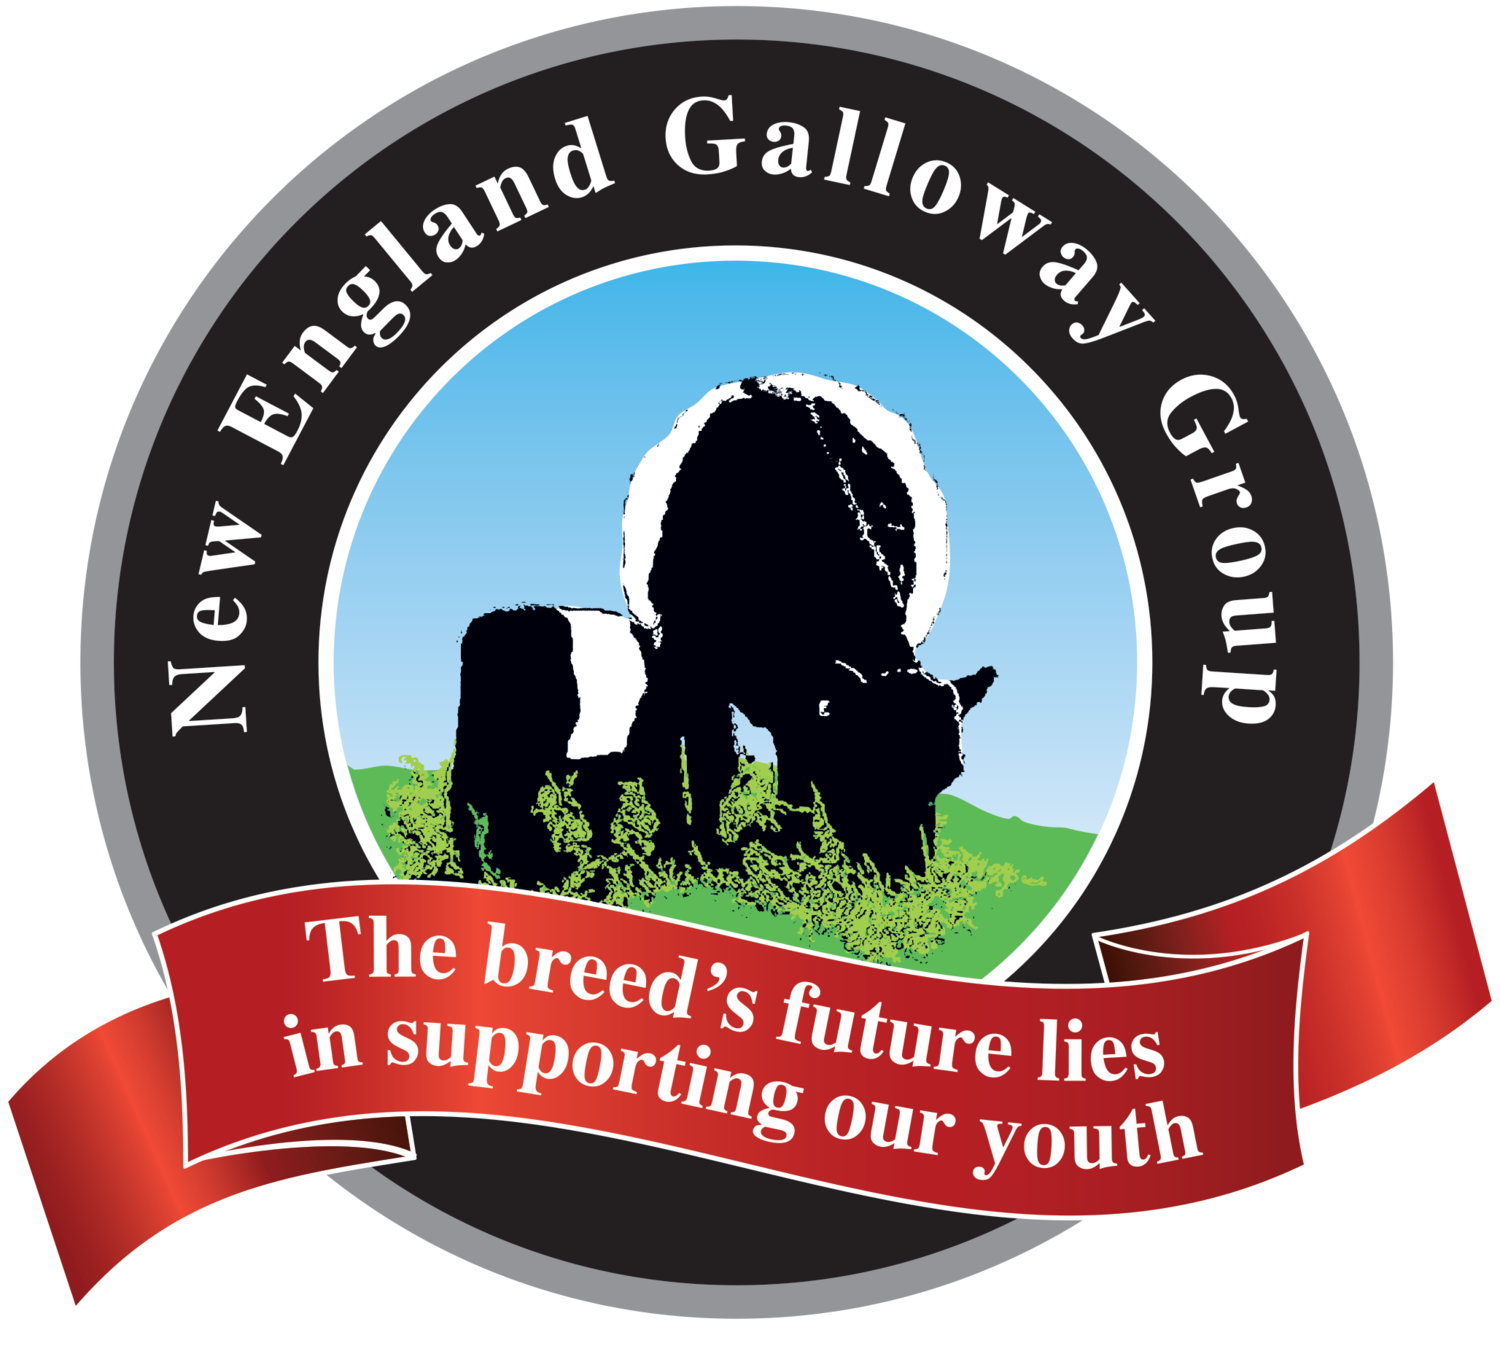 new-england-galloway-group